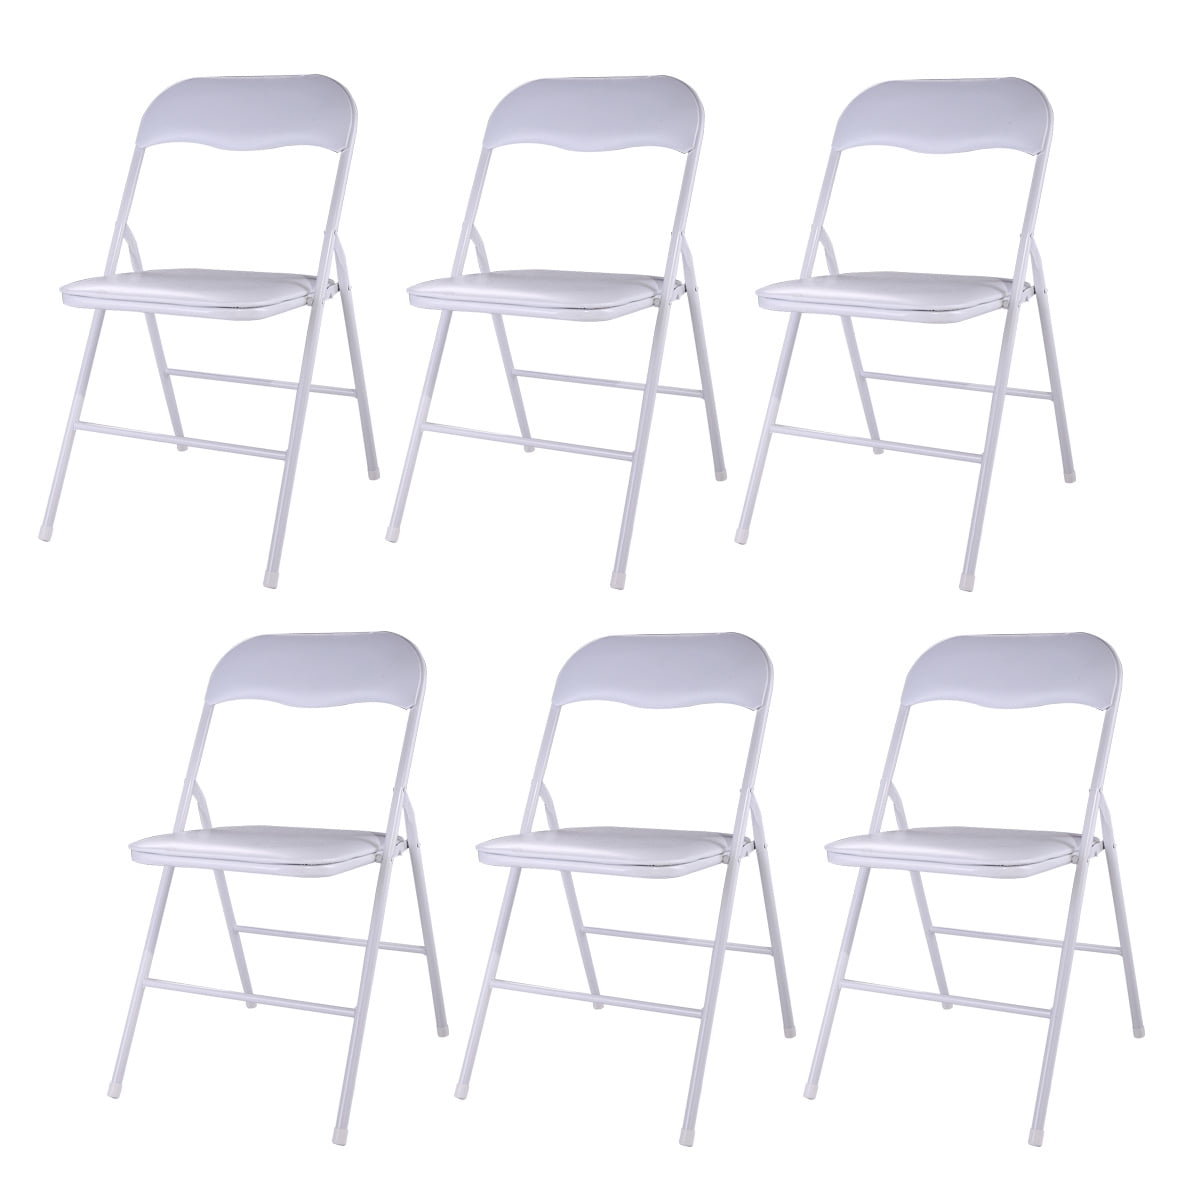 Jaxpety 6 Pack Commercial Plastic Folding Chairs in White